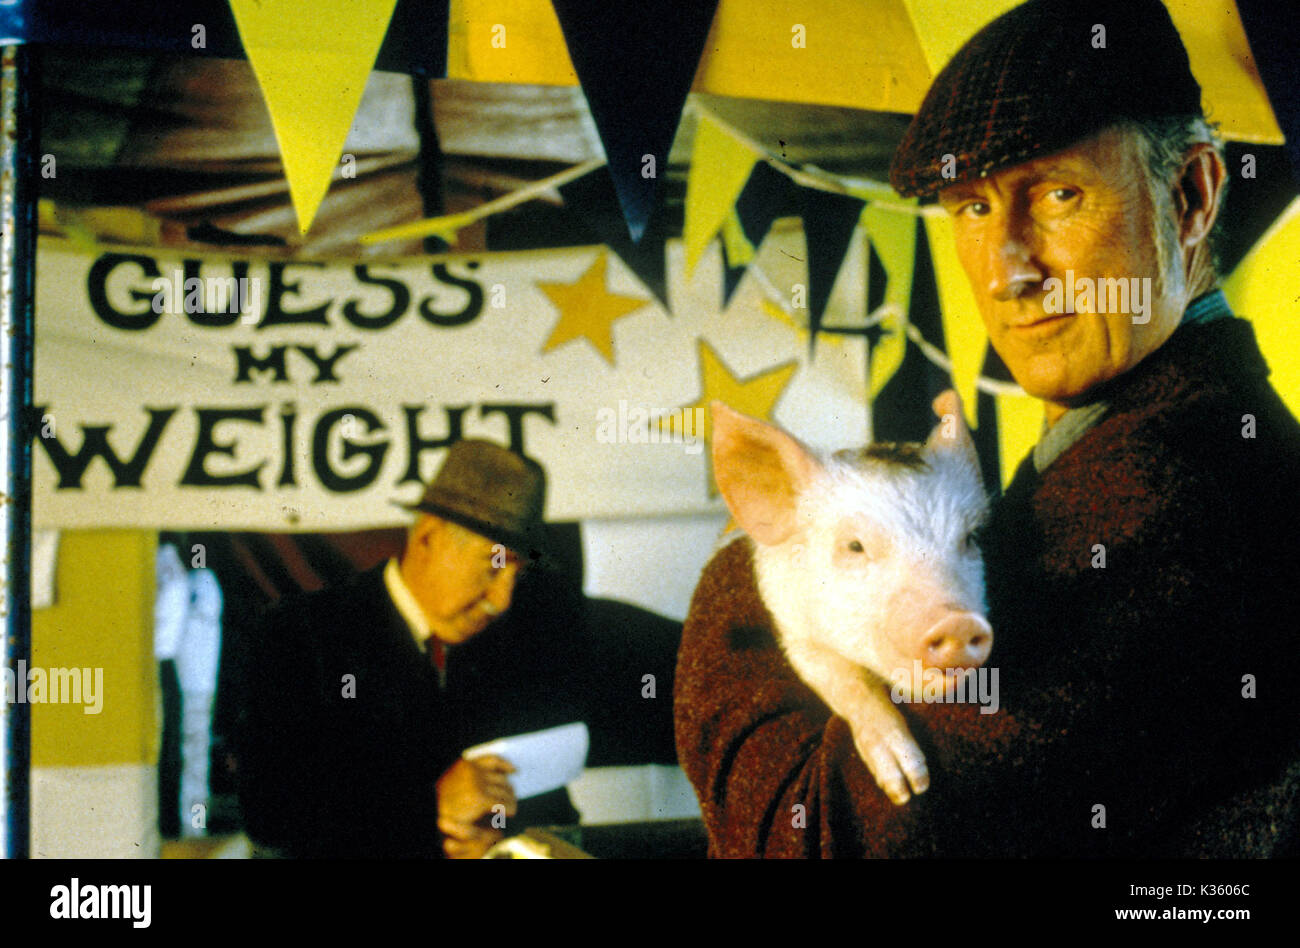 BABE, THE GALLANT PIG JAMES CROMWELL   A KENNEDY MILLER PRODUCTION BABE, THE GALLANT PIG  JAMES CROMWELL     Date: 1995 Stock Photo